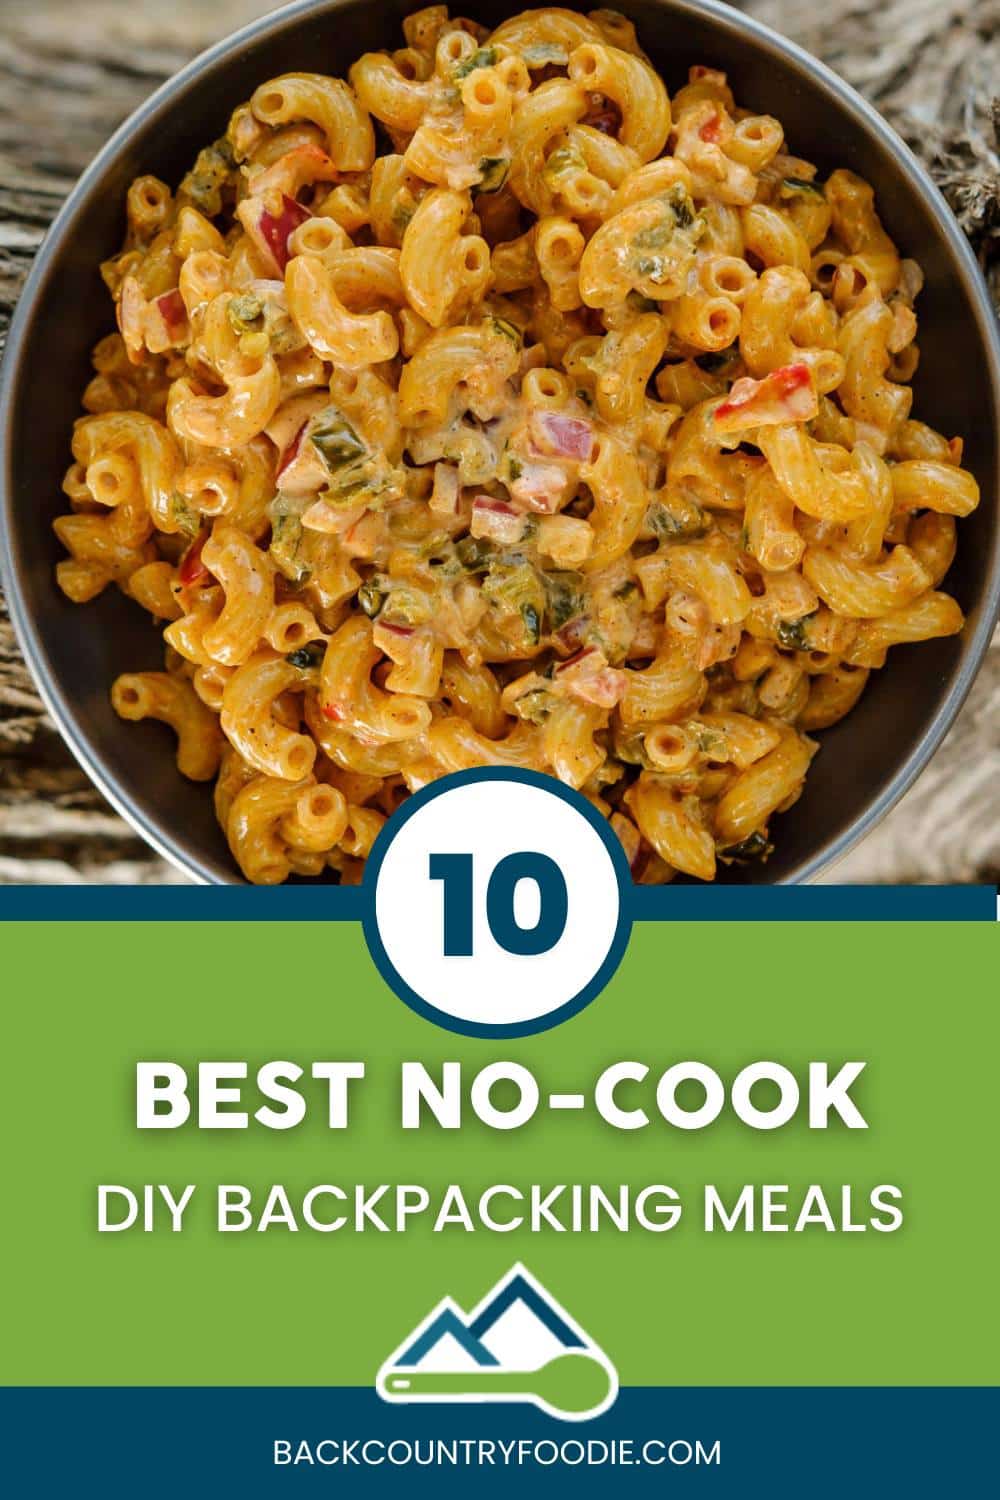 Backcountry Foodie Blog 10 Best No Cook Backpacking Meals Recipes